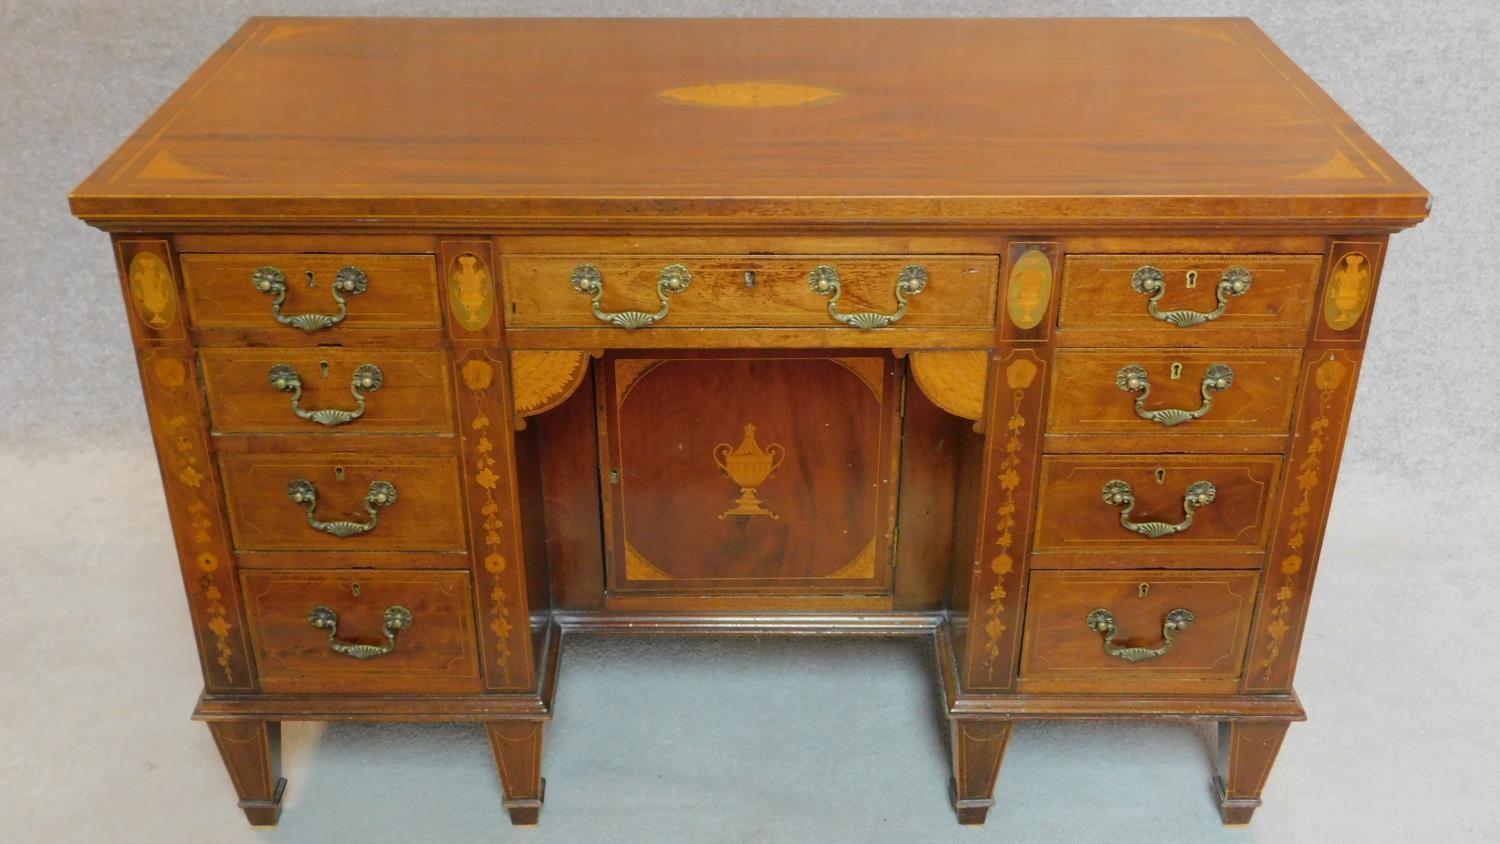 An Edwardian mahogany and satinwood inlaid kneehole desk with allover conch shell, swag and urn